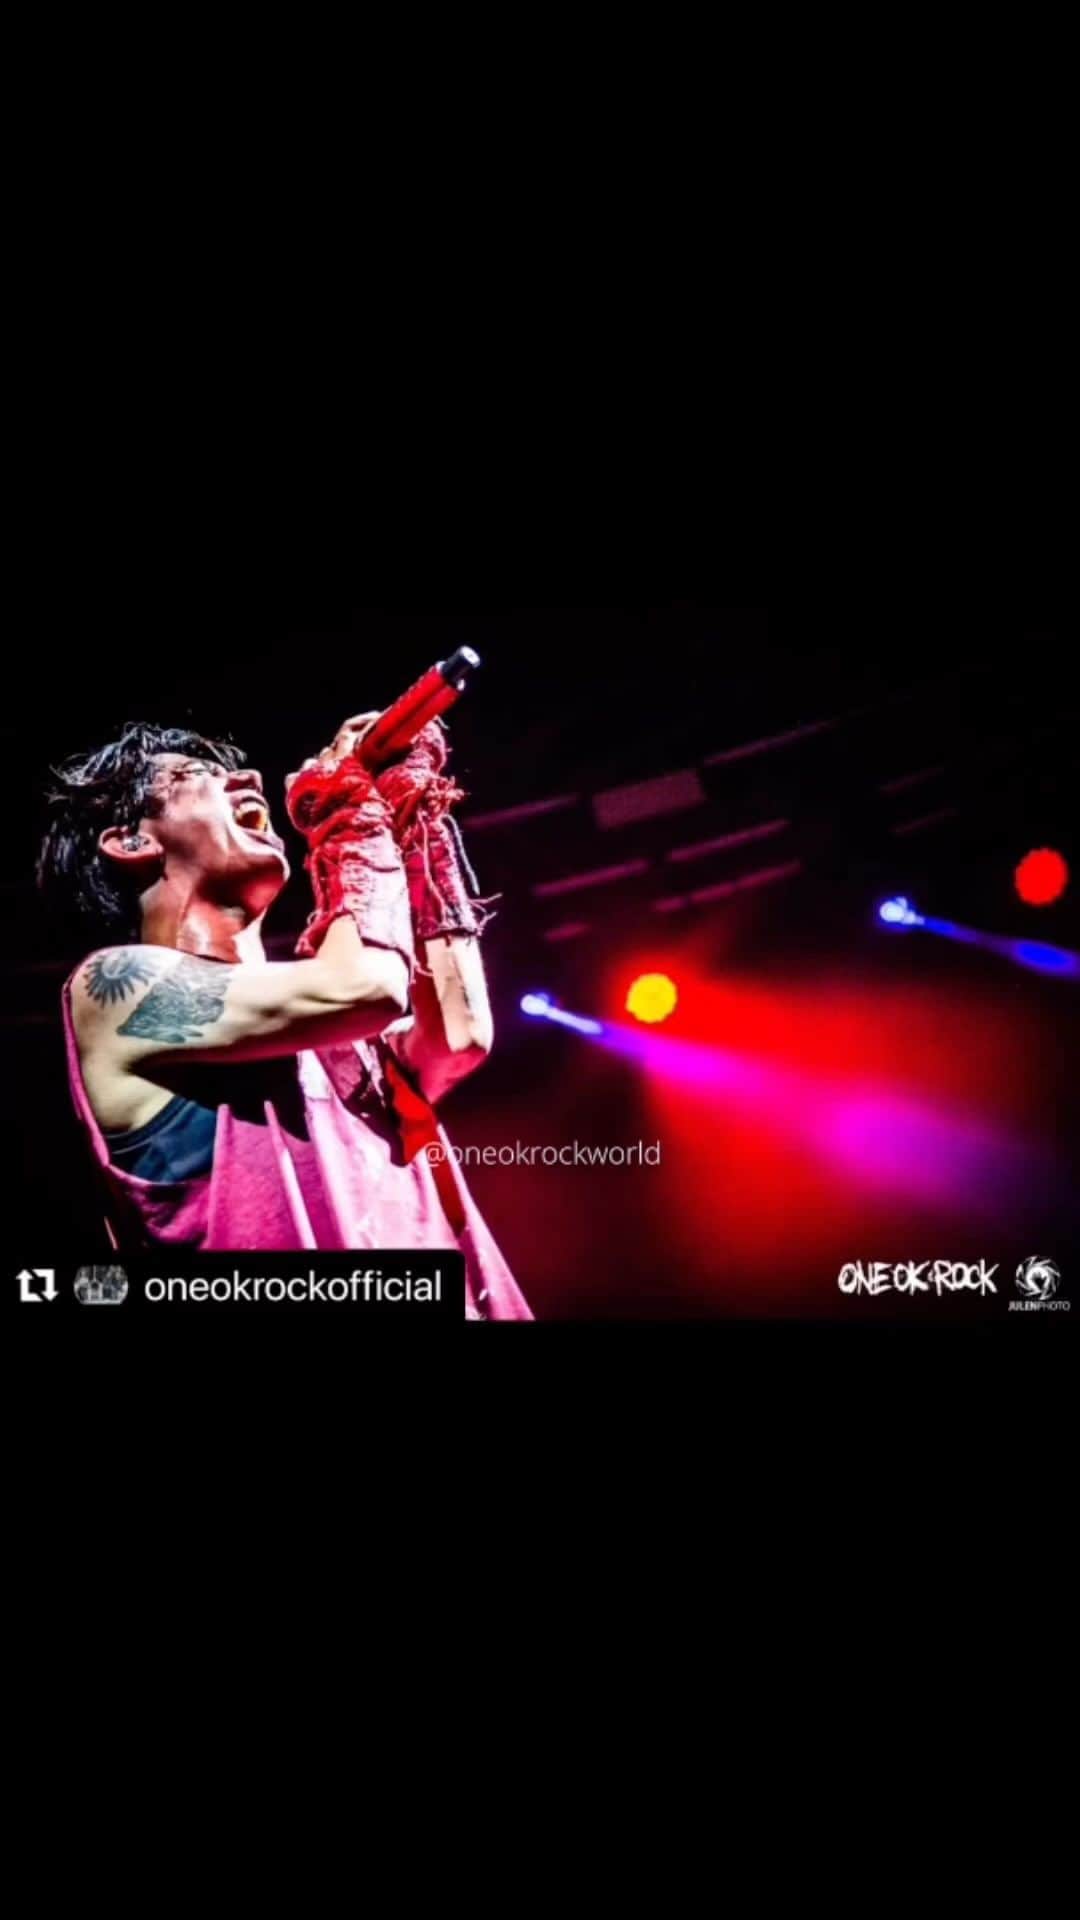 ONE OK ROCK WORLDのインスタグラム：「- ◇LUXURY DISEASE TOUR EUROPE 2023  Day 11  Milan  #Repost  - @oneokrockofficial  ・・・ Thanks Milan!! ONE OK ROCK 2023 LUXURY DISEASE EUROPE TOUR!!  #ONEOKROCK #LuxuryDisease #Europe #tour photo by @julenphoto  - @tomo_10969 ・・・ Milano! Ti sei divertito tantissimo! Non lo dimenticherò mai! Tornerò ancora. Grazie! ・ ミラノ！ 素晴らしい時間を過ごしたね！ 決して忘れないよ！ また来るよ 。ありがとう！ ・ Milan! We had a wonderful time! I am never going to forget it! We'll be back. Thank you!  みらぁのぉ🔥 ヘッドライナーファイナル叩き終わり🔥 ・ Milanoo🔥 Finished beating for the final show as a headliner🔥  待っててくれる人たちがいるから、前に進めます。 ありがとう。 ・ There are people waiting for us, and that’s why we can keep on moving forward. Thanks.   明日はサポートファイナル。 精一杯叩きます🕊 ・ Tomorrow is the final show as a supporter.  I will do my best 🕊   @oneokrockofficial  @julenphoto 📸   #oneokrock #drummer #luxurydisease #milano #🇮🇹  - @toru_10969  ・・・ Incredible night!!!! Thanks Milan🇮🇹🇮🇹 ・ 信じられない夜!!!! ミラノ、ありがとう🇮🇹🇮🇹  📸 @julenphoto  #oneokrock  #luxurydisease  - @10969taka  ・・・ Milan was so sick!!!! Thank you for having us🤓 🇮🇹 ・ ミラノは超ヤバかった!!!! お招きありがとうございます🤓 🇮🇹  @julenphoto  - @ryota_0809 ・・・ Thank you Milano!!🇮🇹✨ ・ ミラノ、ありがとう🇮🇹✨  @julenphoto  - #oneokrockofficial #10969taka#toru_10969#tomo_10969 #ryota_0809#fueledbyramen#luxurydisease #LUXURYDISEASETOUREUROPE2023  #Milan #Milano」